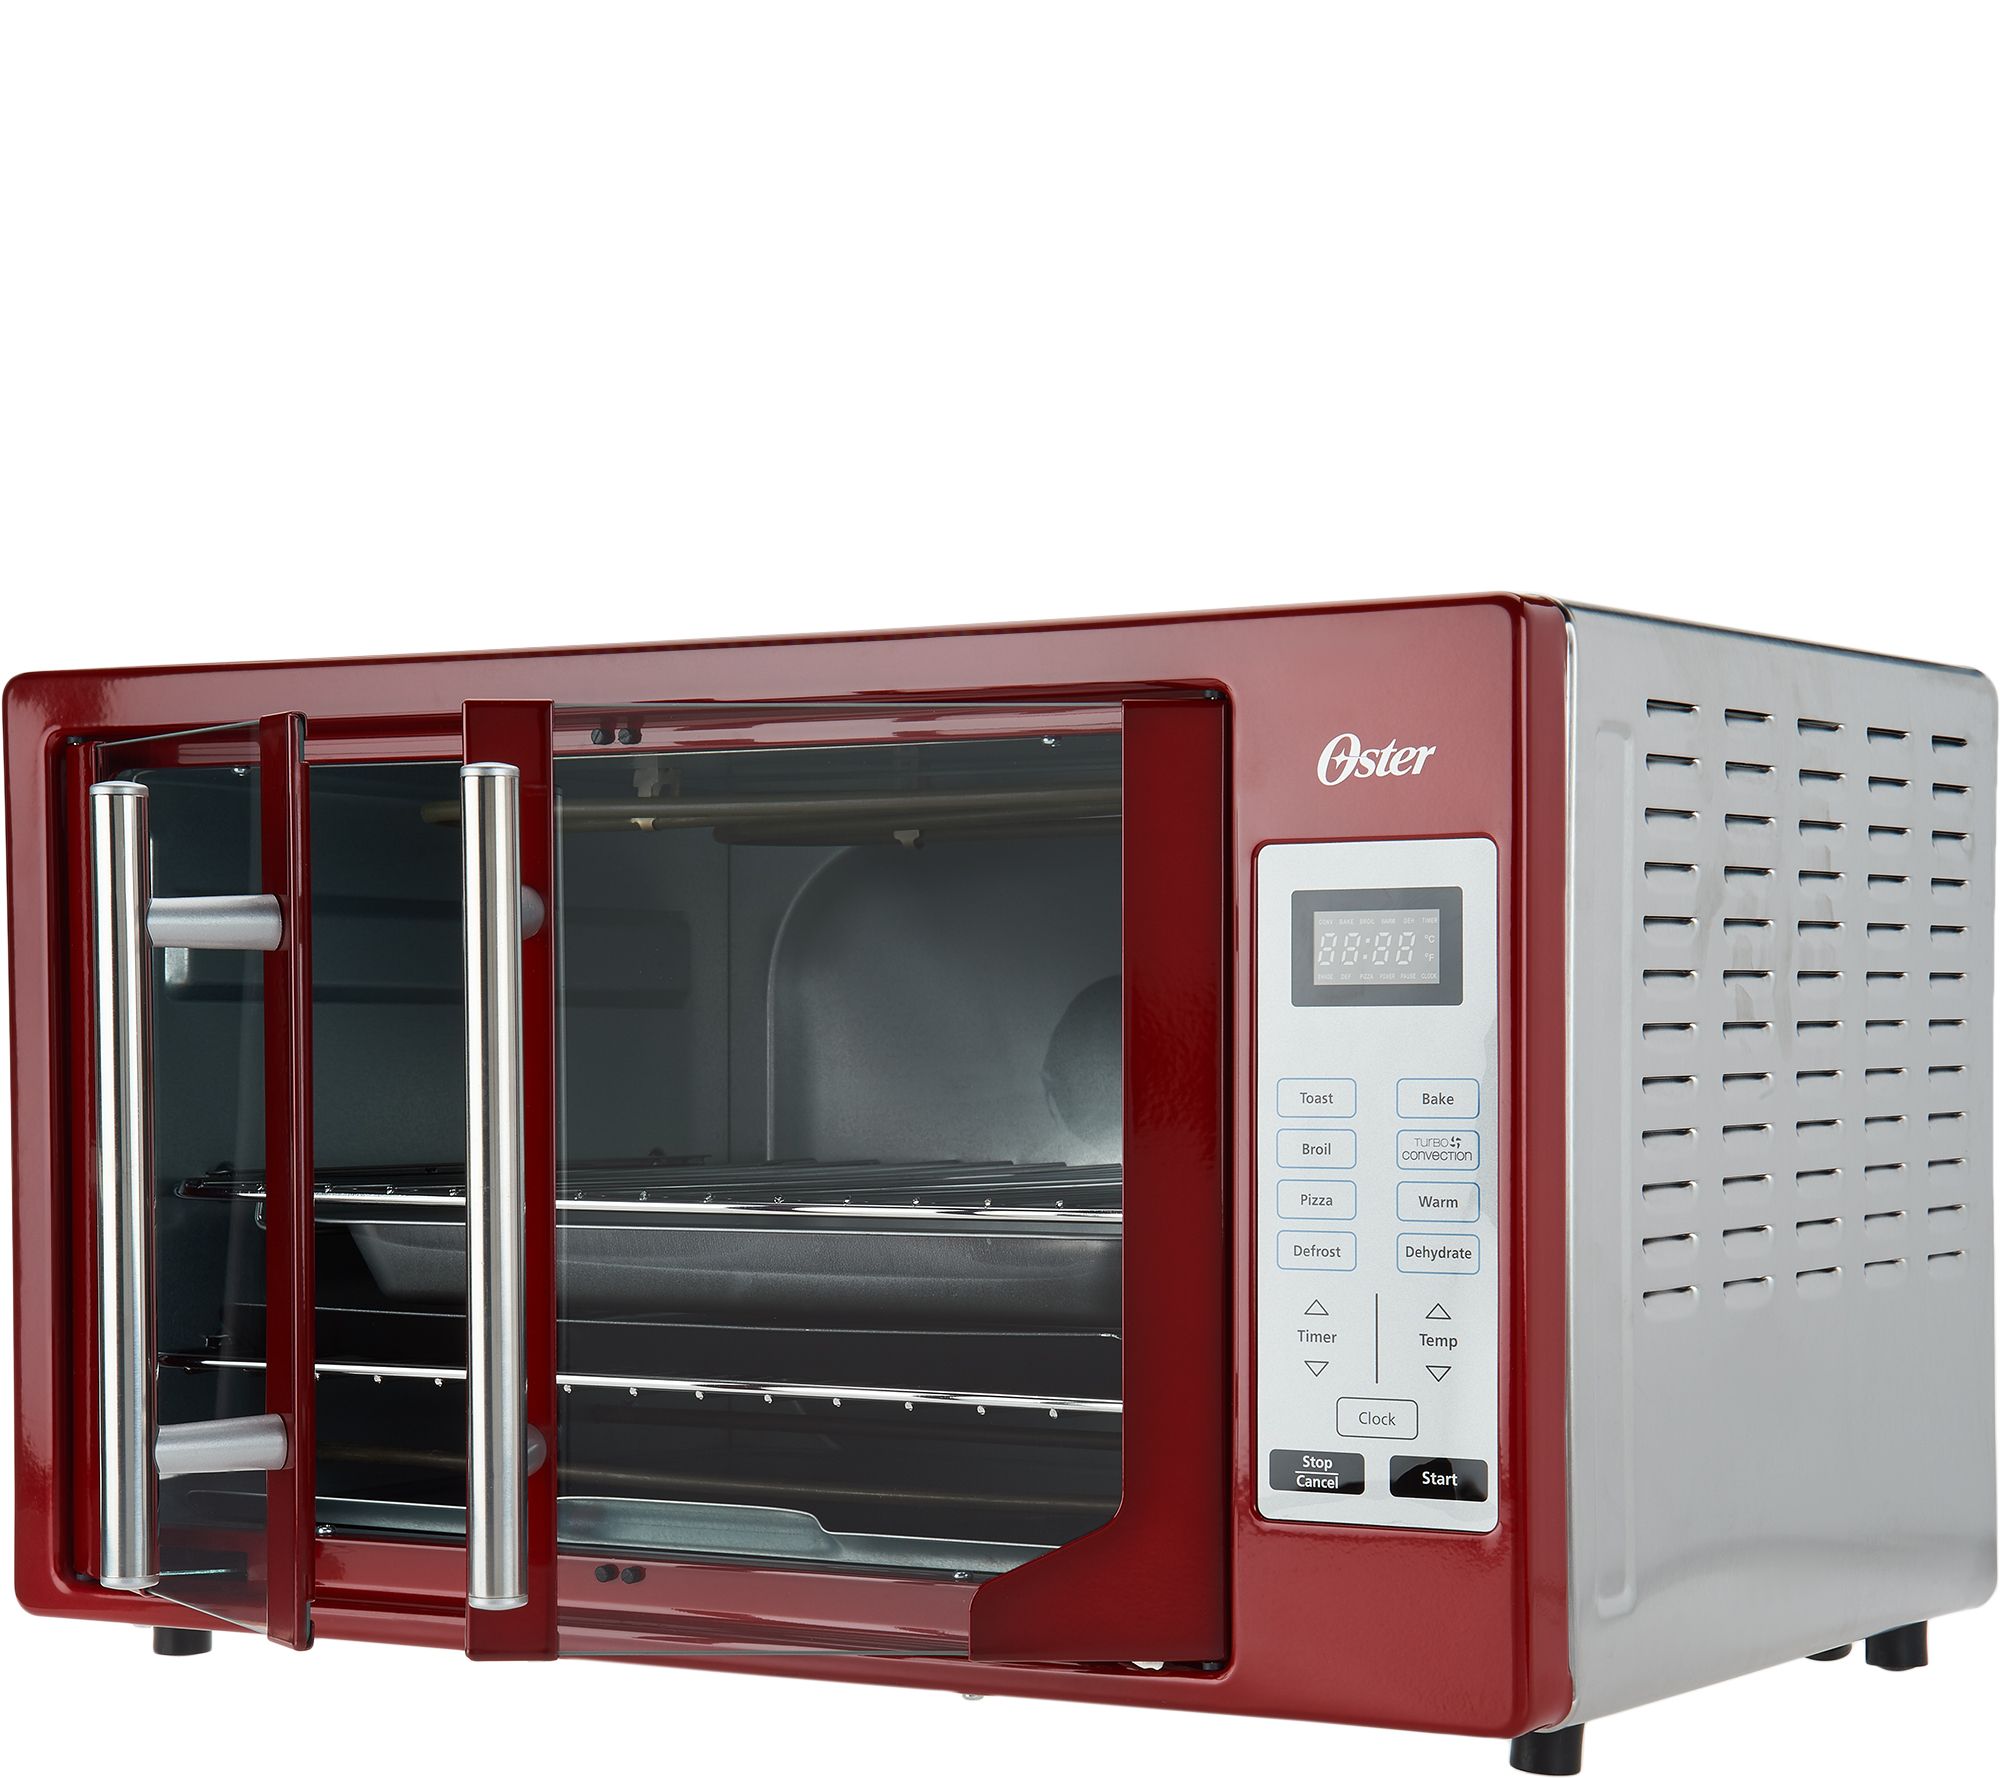 Oster XL Digital Convection Oven w/ French Doors $129.98